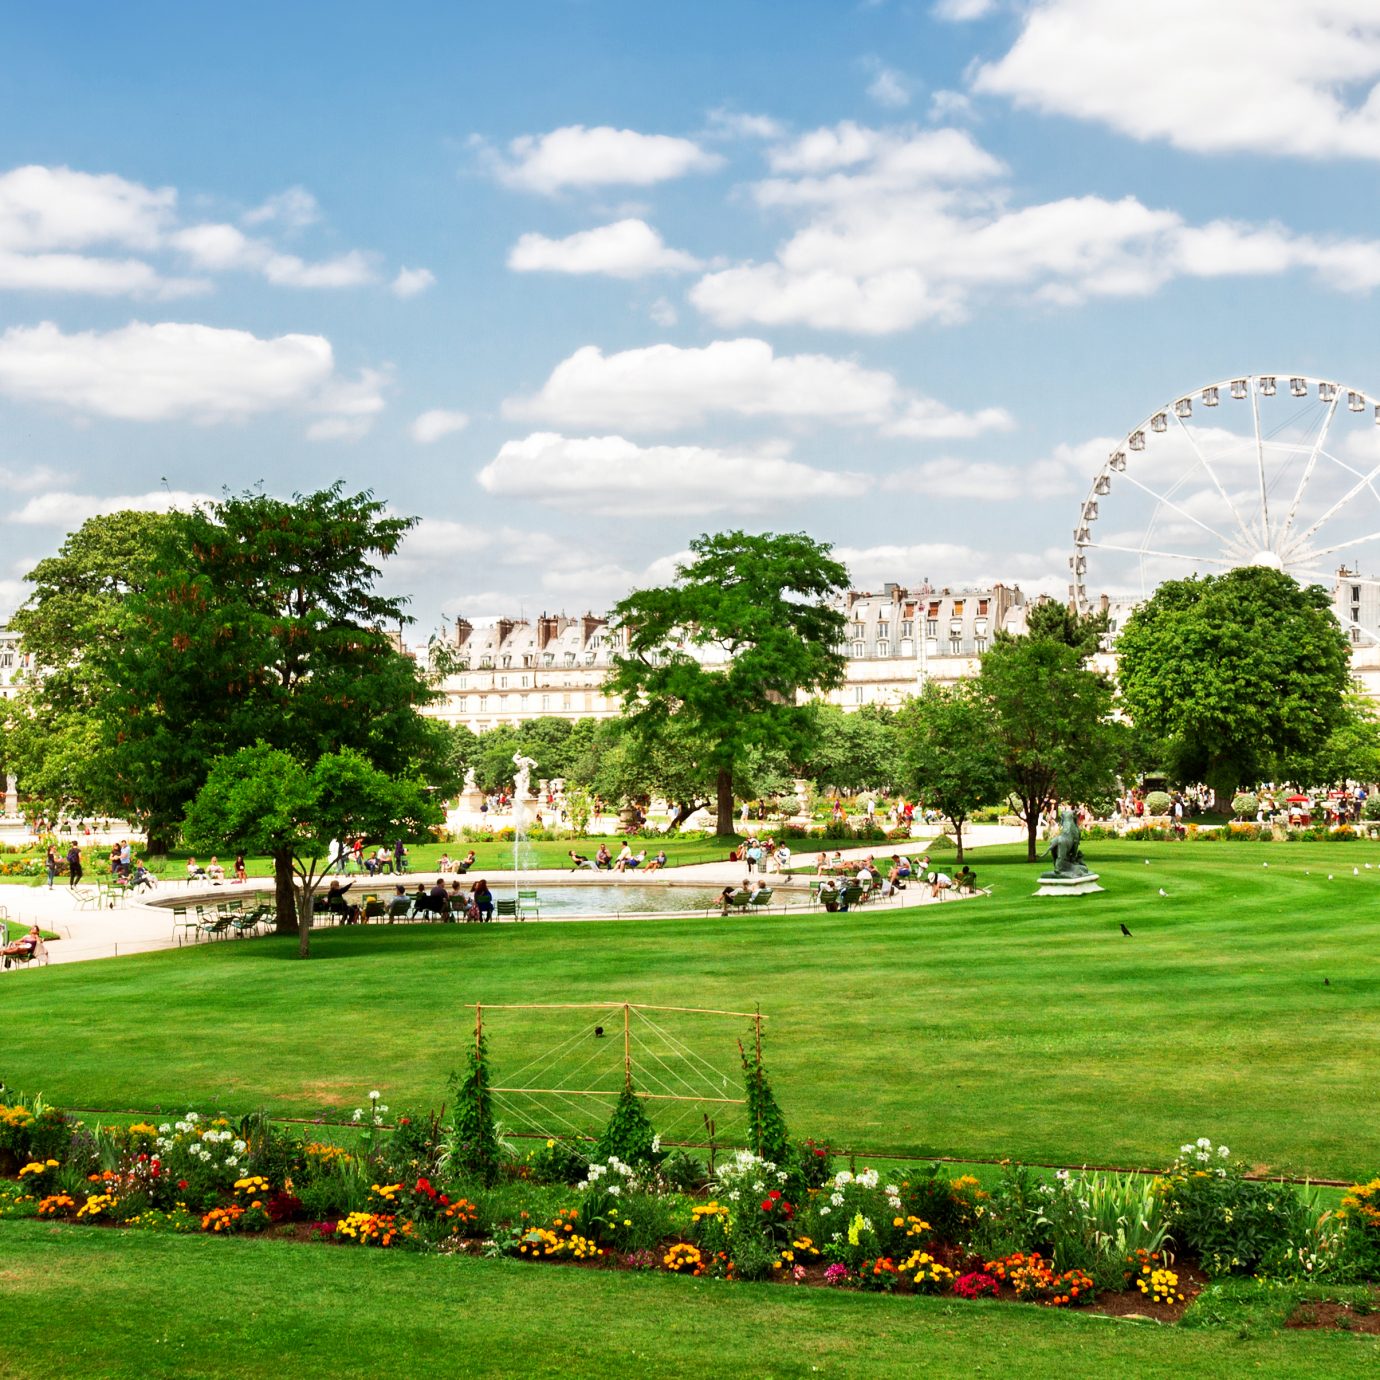 Tuileries garden at summer day, green lawn and blue sky with clouds, Paris France